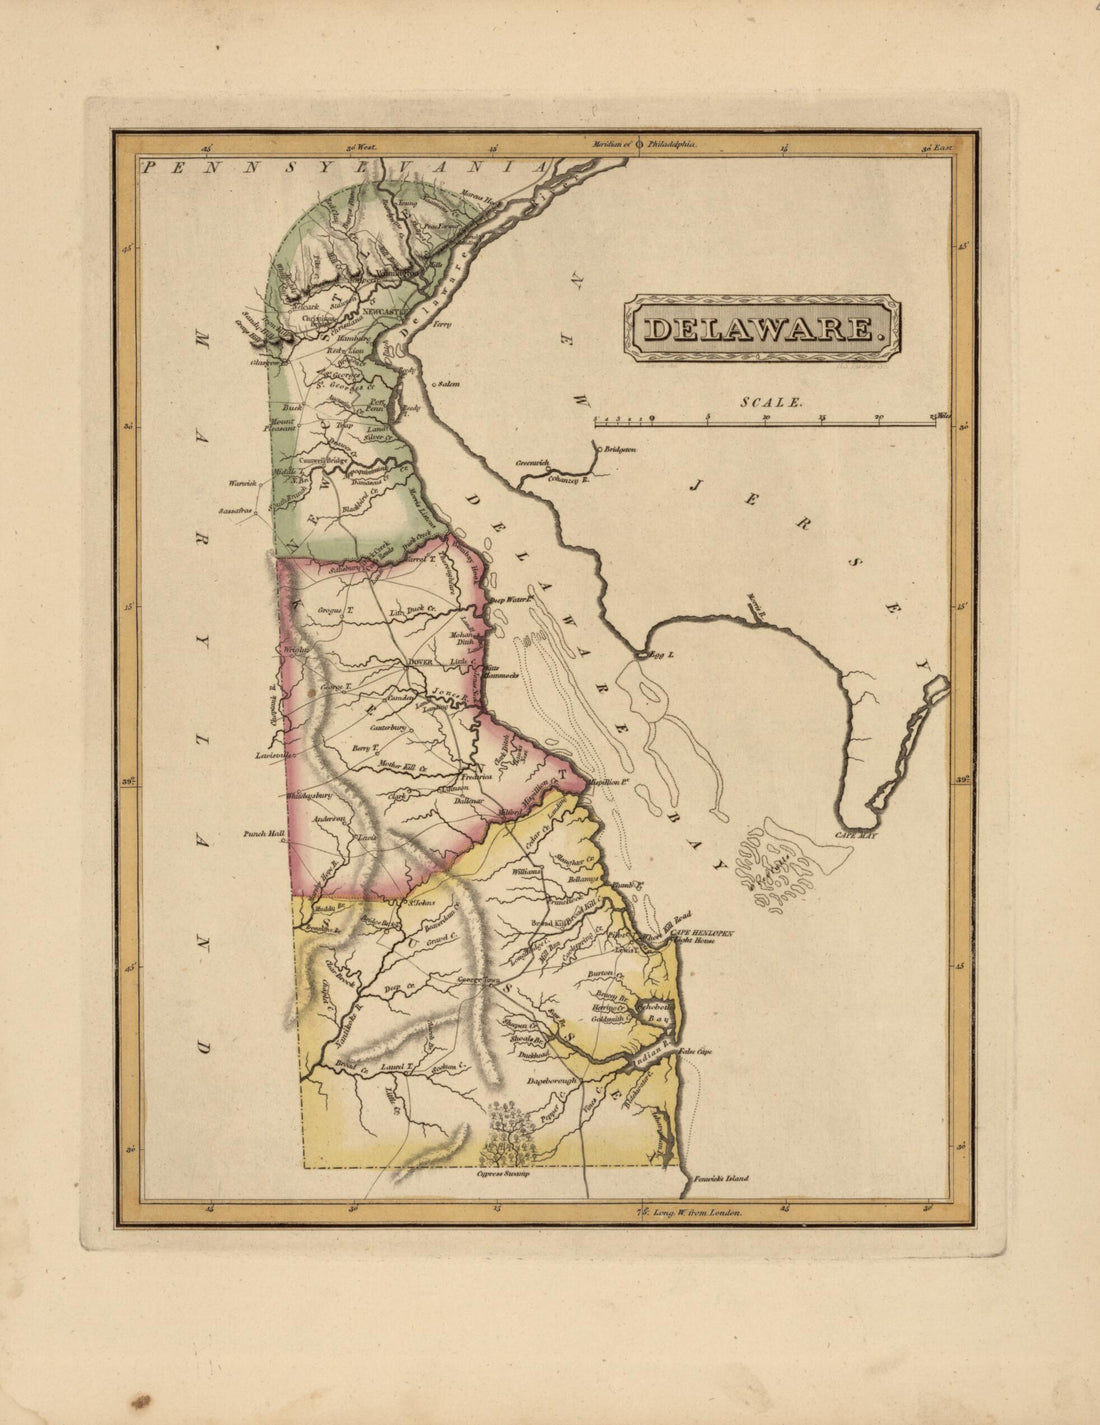 This old map of Delaware from a New and Elegant General Atlas, Containing Maps of Each of the United States  from 1817 was created by Henry Schenck Tanner in 1817